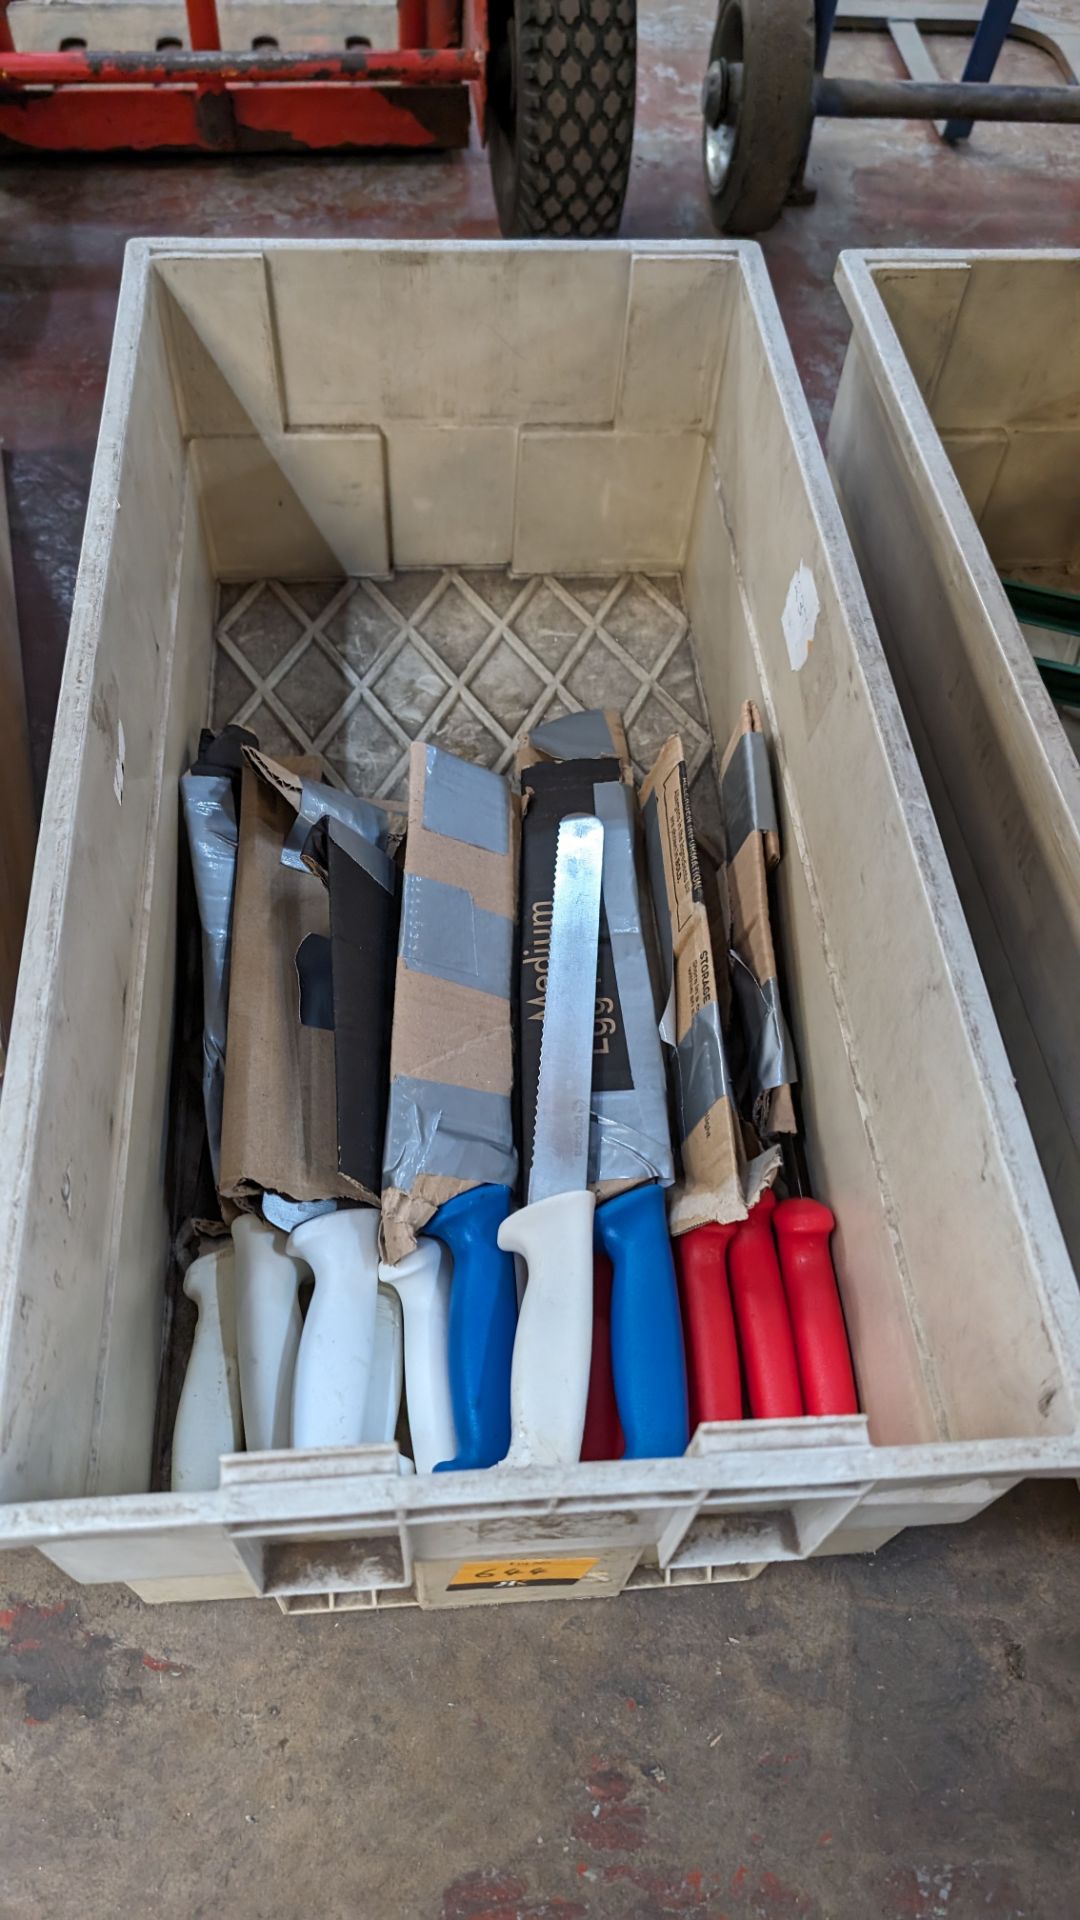 The contents of a crate of chefs knives - Image 2 of 4